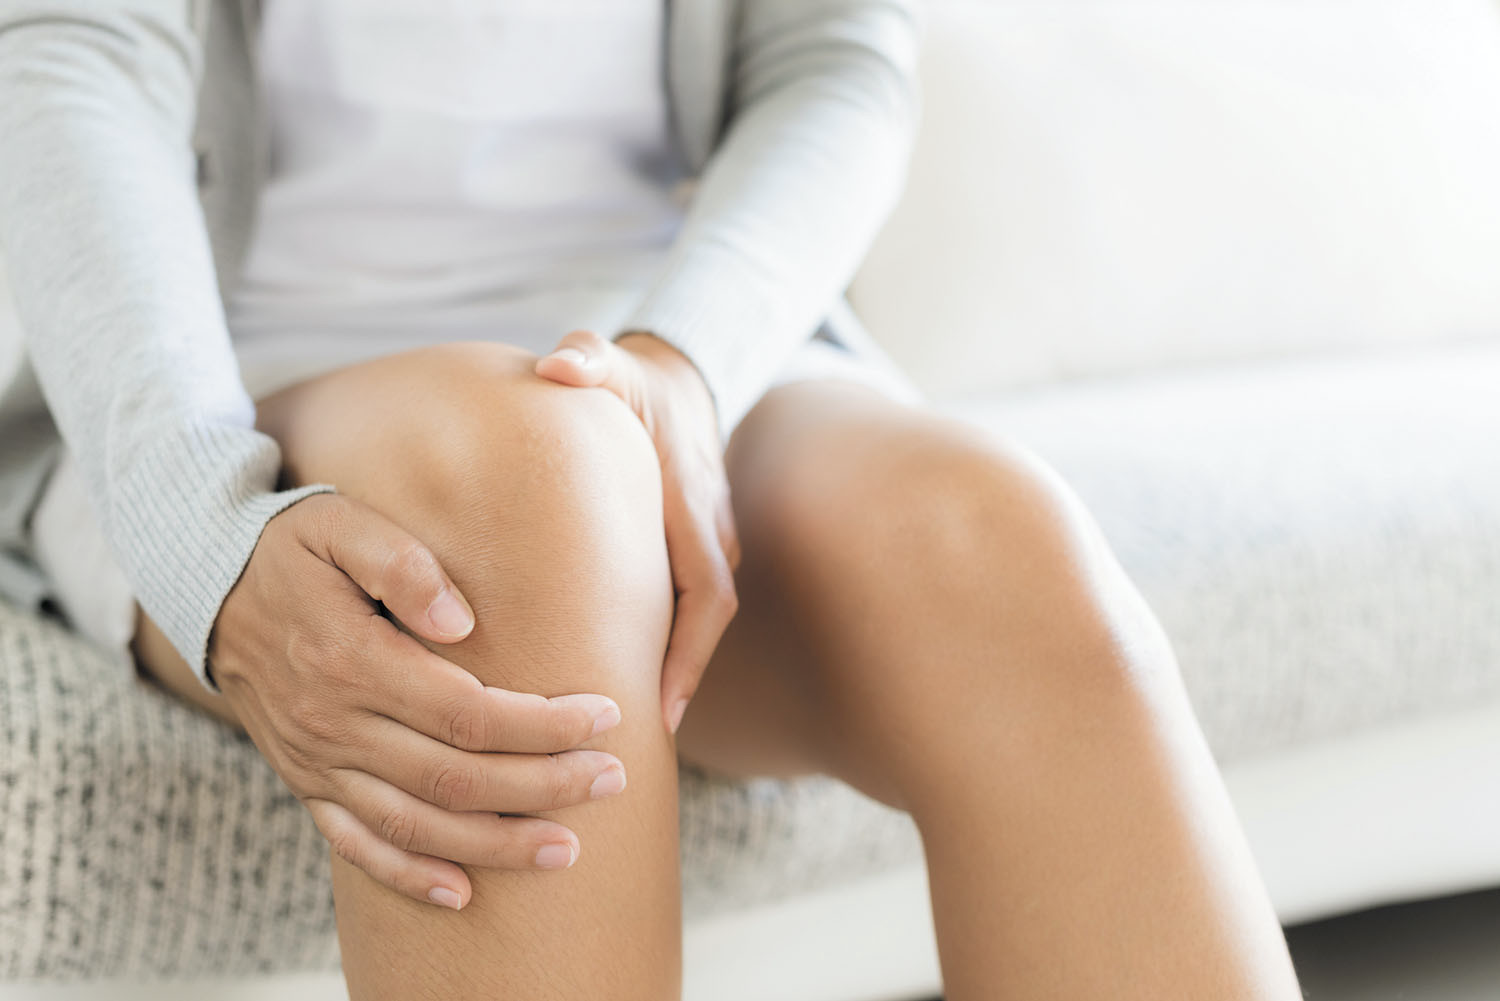 What Causes Sudden Knee Pain without Injury?